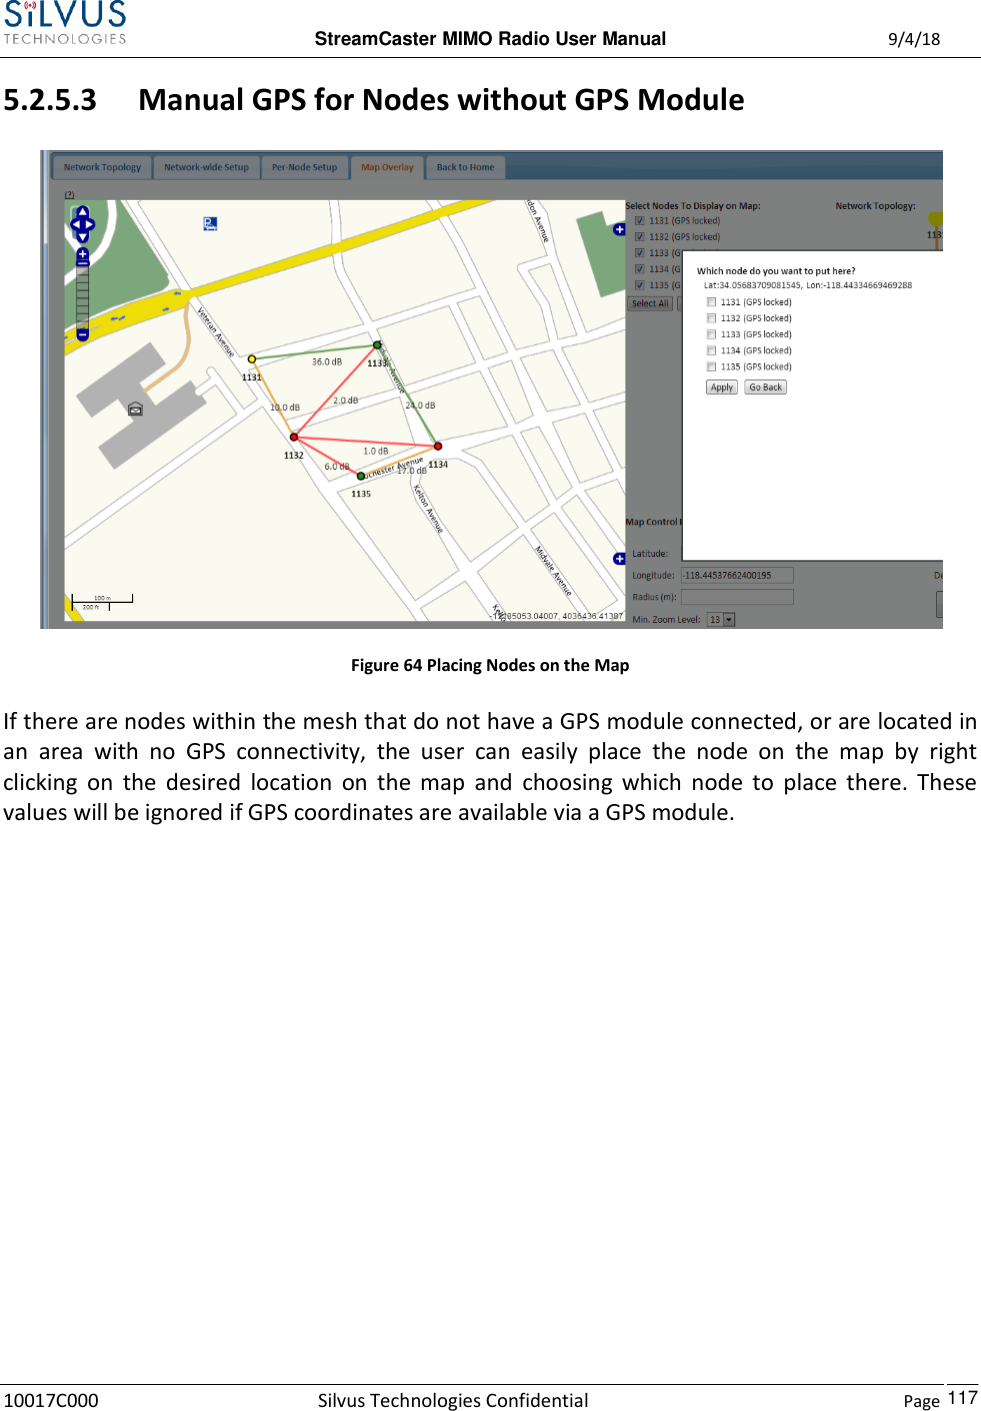  StreamCaster MIMO Radio User Manual  9/4/18 10017C000 Silvus Technologies Confidential    Page    117 5.2.5.3 Manual GPS for Nodes without GPS Module  Figure 64 Placing Nodes on the Map If there are nodes within the mesh that do not have a GPS module connected, or are located in an  area  with  no  GPS  connectivity,  the  user  can  easily  place  the  node  on  the  map  by  right clicking  on  the  desired  location  on  the  map  and  choosing  which  node  to  place  there.  These values will be ignored if GPS coordinates are available via a GPS module.     